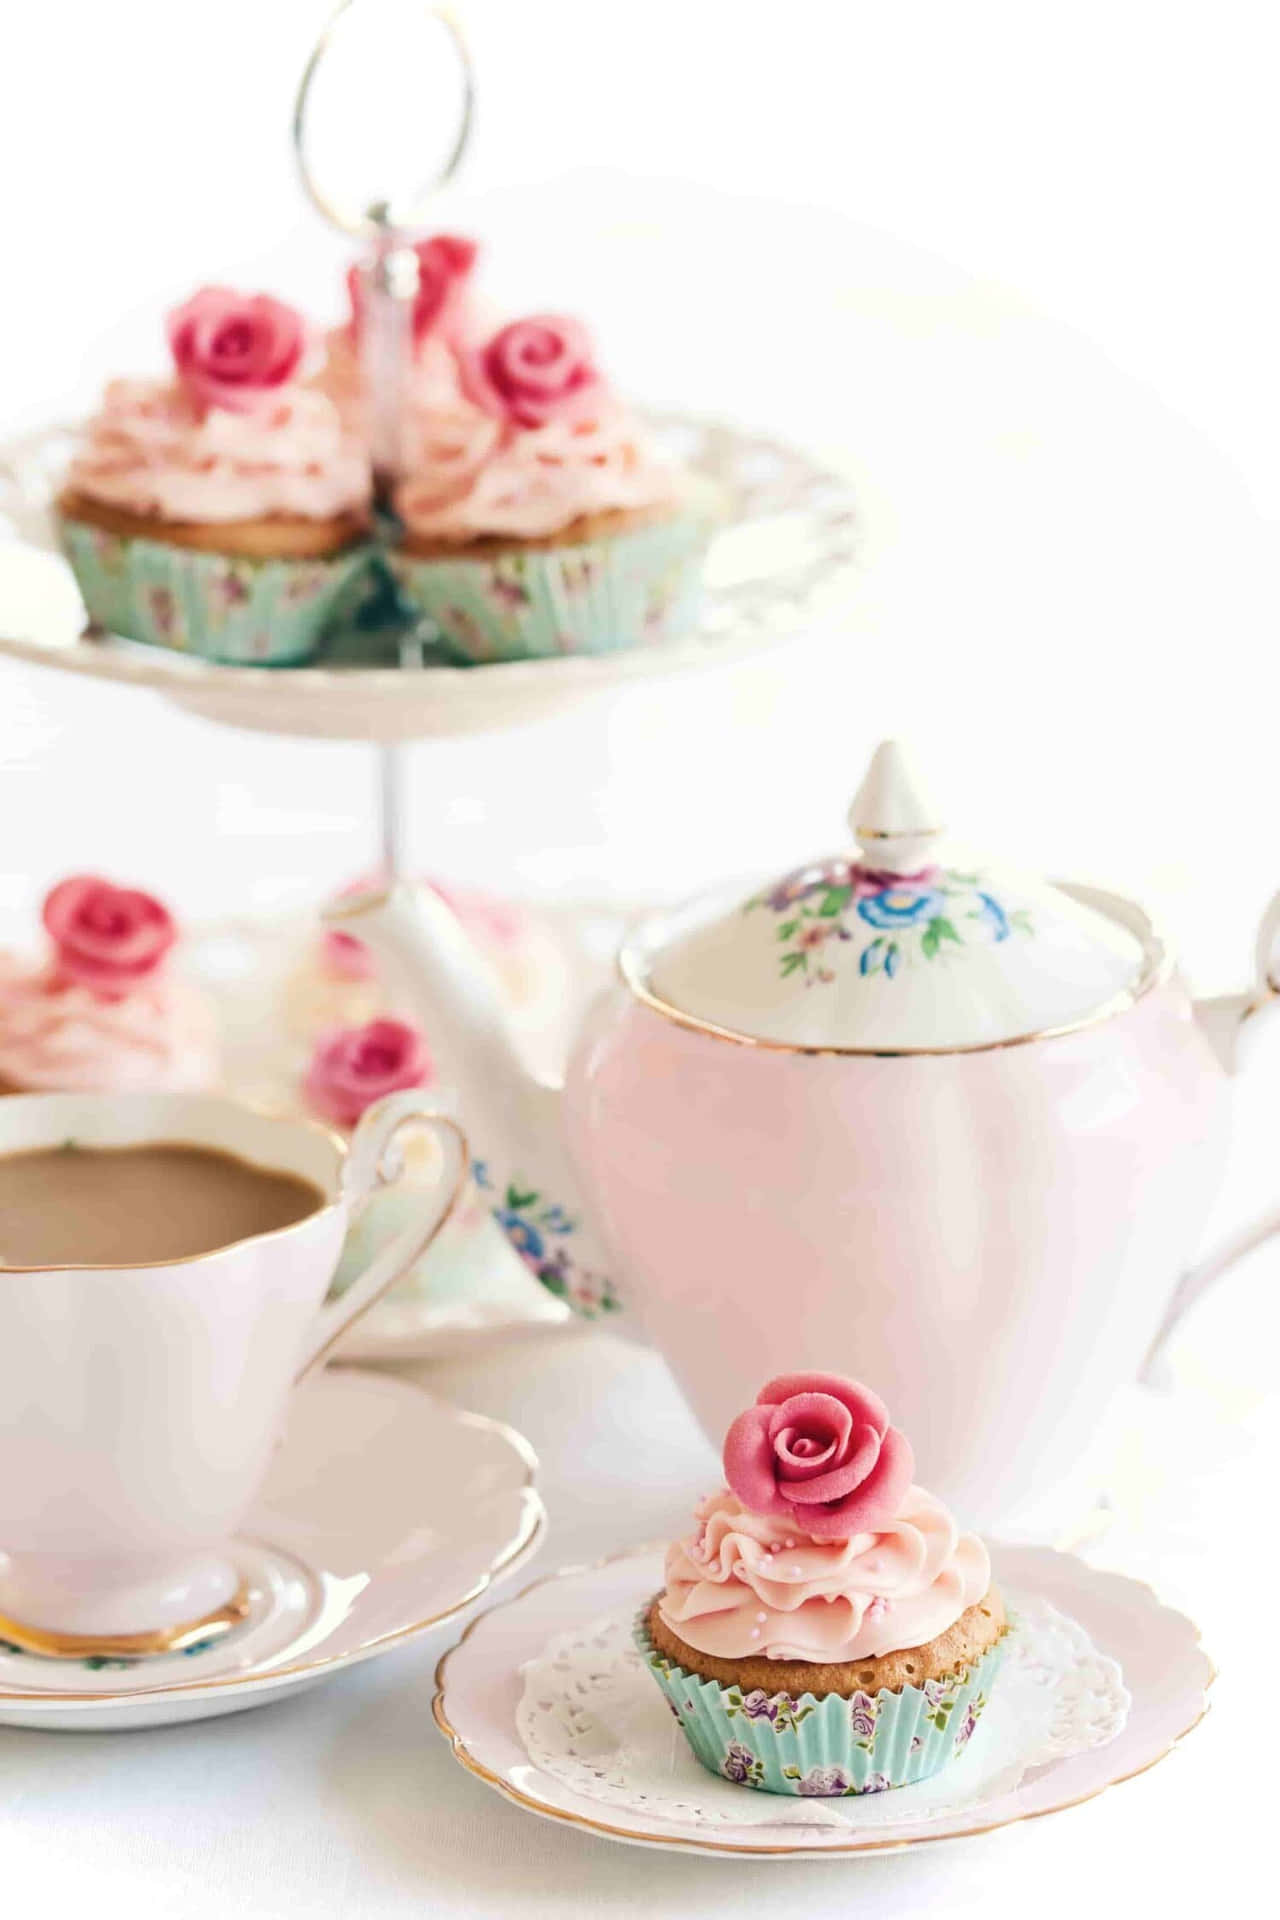 Enjoy a classic English tea party with friends and family.